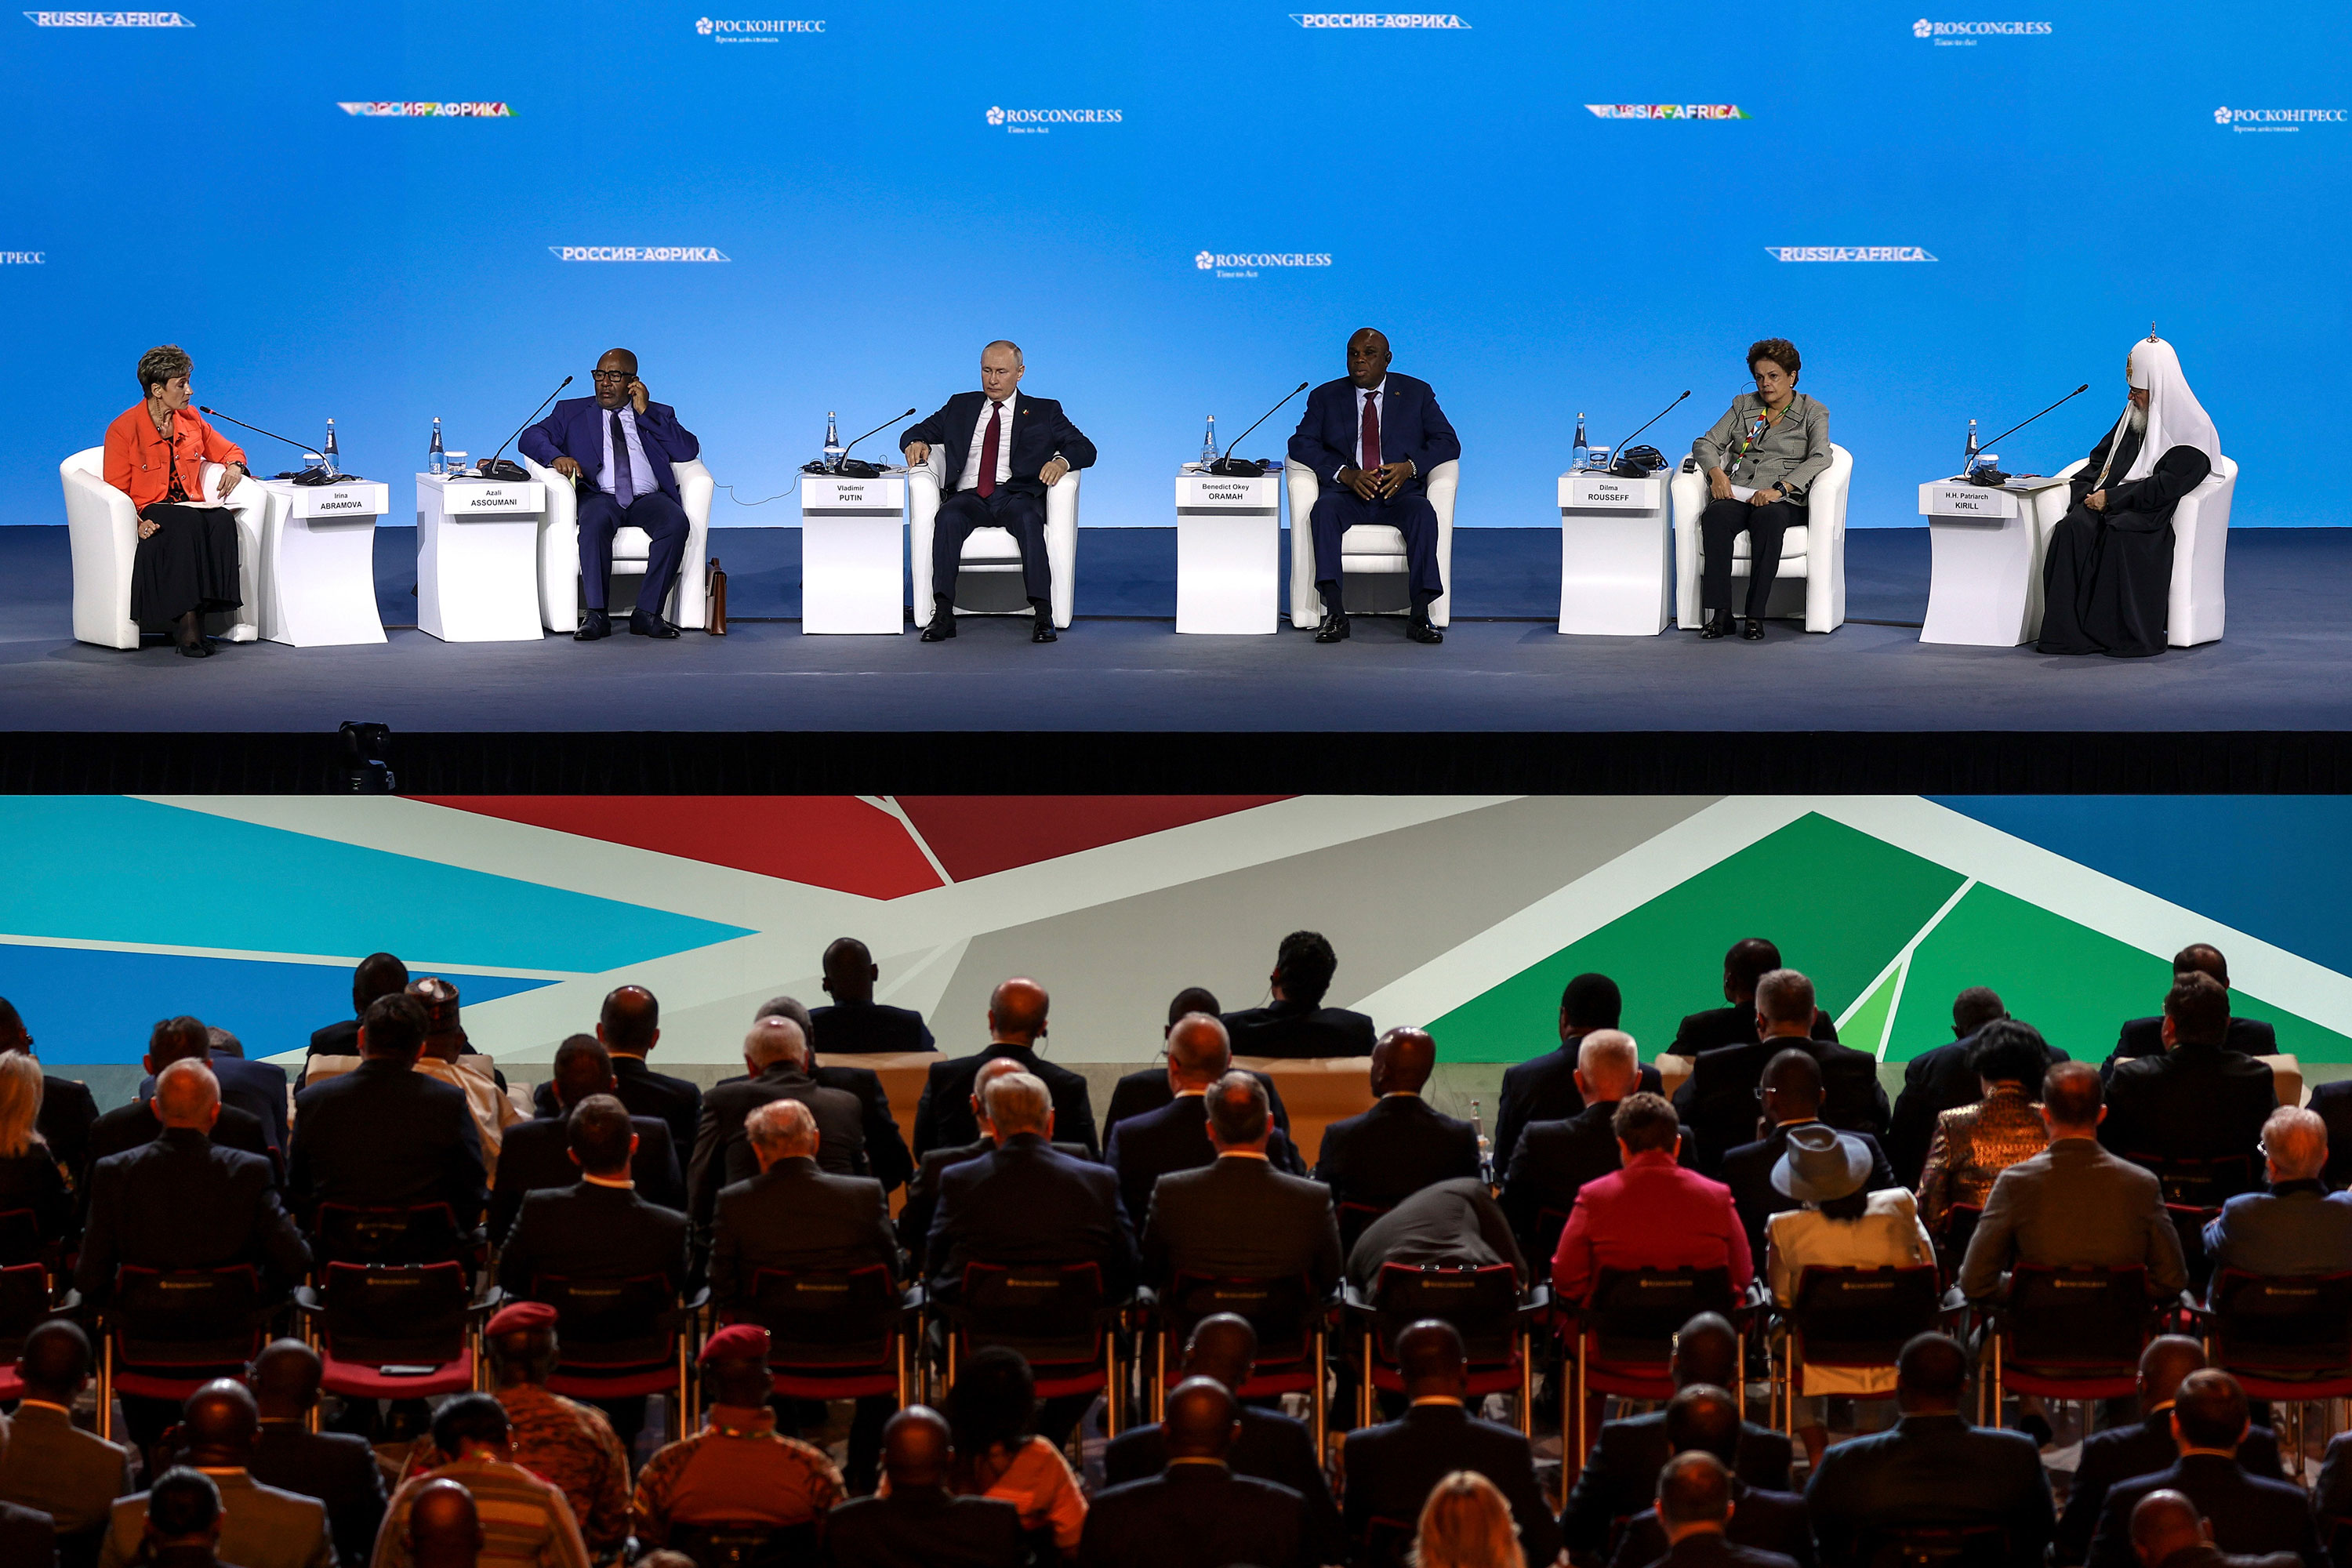 From left: Director of the Institute for African Studies at the Russian Academy of Sciences Irina Abramova, African Union Chairman, President of the Union of the Comoros Azali Assoumani, Russian President Vladimir Putin, Chairman of the Board of Directors at African Export-Import Bank Benedict Okey Oramah, New Development Bank President Dilma Rousseff and head of the Russian Orthodox Church Patriarch Kirill attend a plenary session of the Russia-Africa Summit and Economic and Humanitarian Forum in St. Petersburg on Thursday.